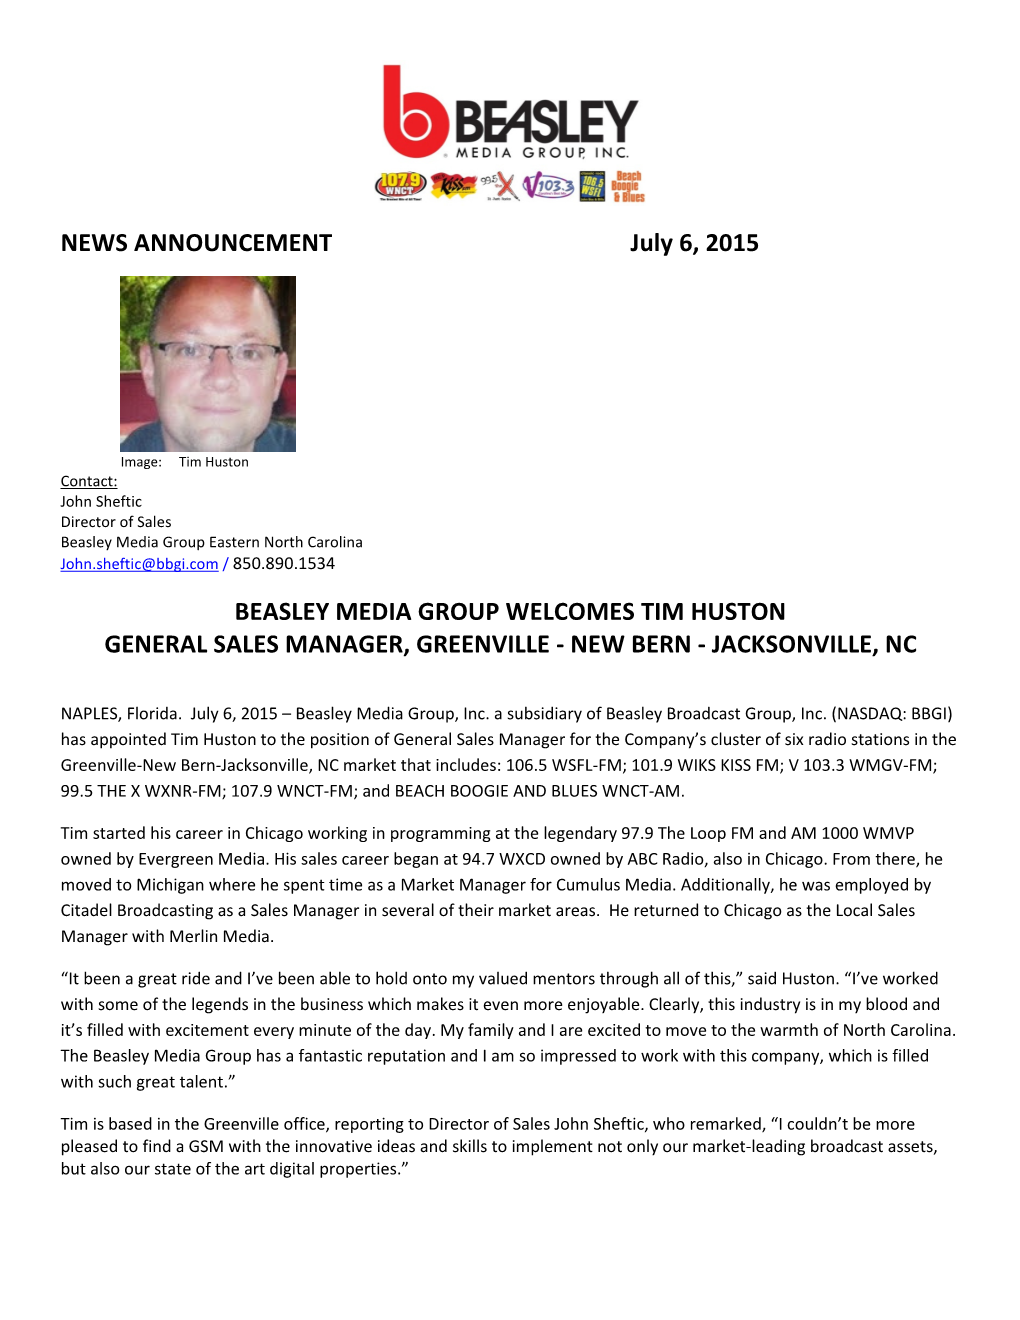 NEWS ANNOUNCEMENT July 6, 2015 BEASLEY MEDIA GROUP WELCOMES TIM HUSTON GENERAL SALES MANAGER, GREENVILLE